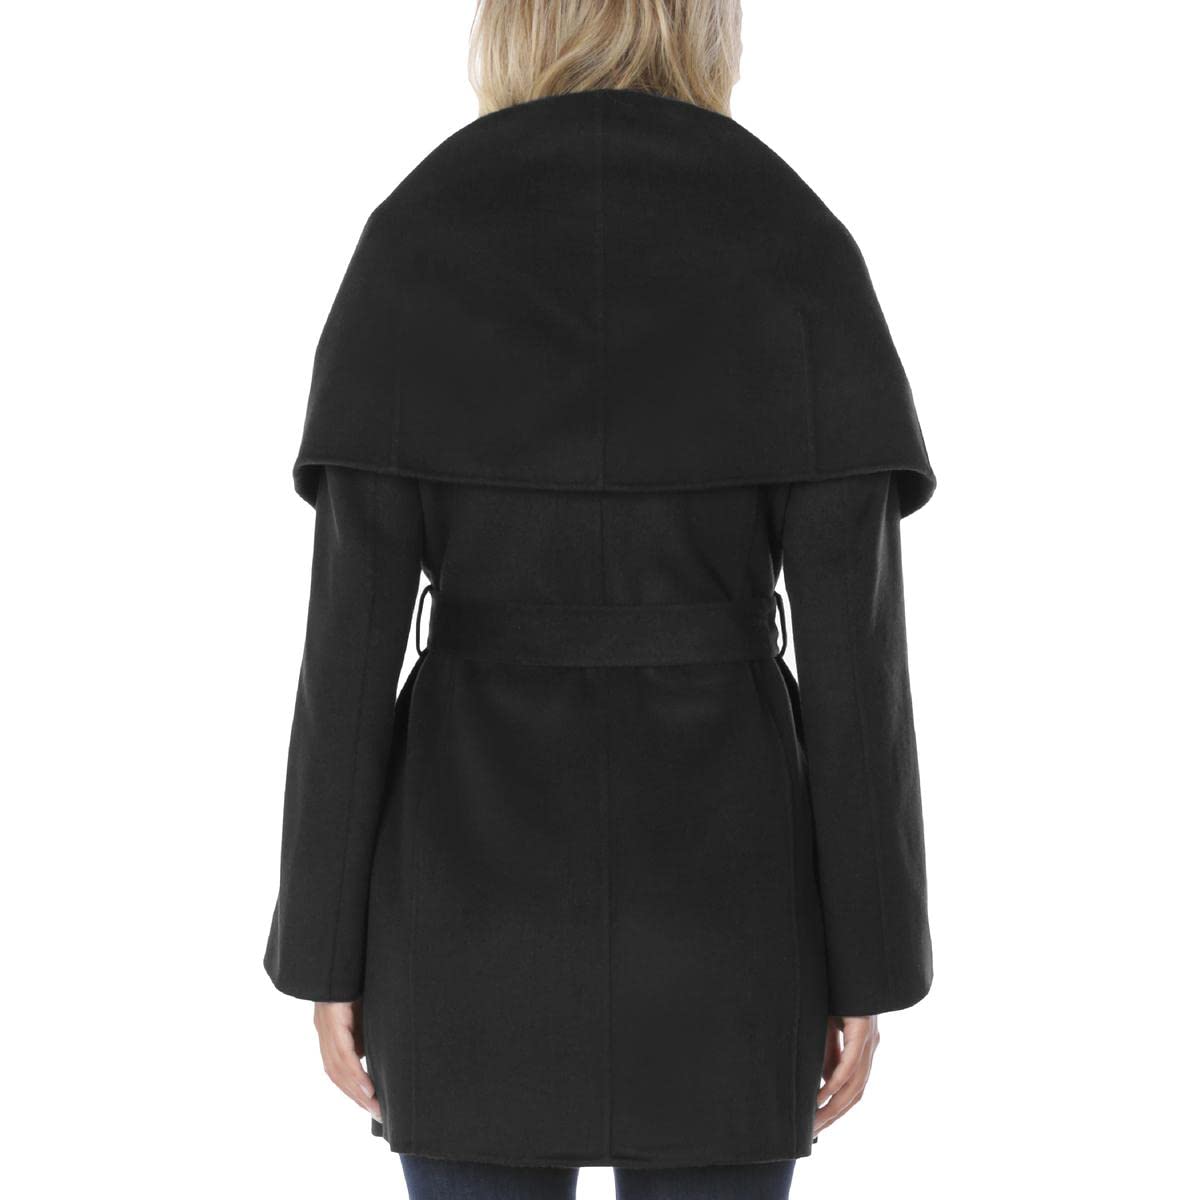 TAHARI Women's Double Face Wool Blend Wrap Coat with Oversized Collar